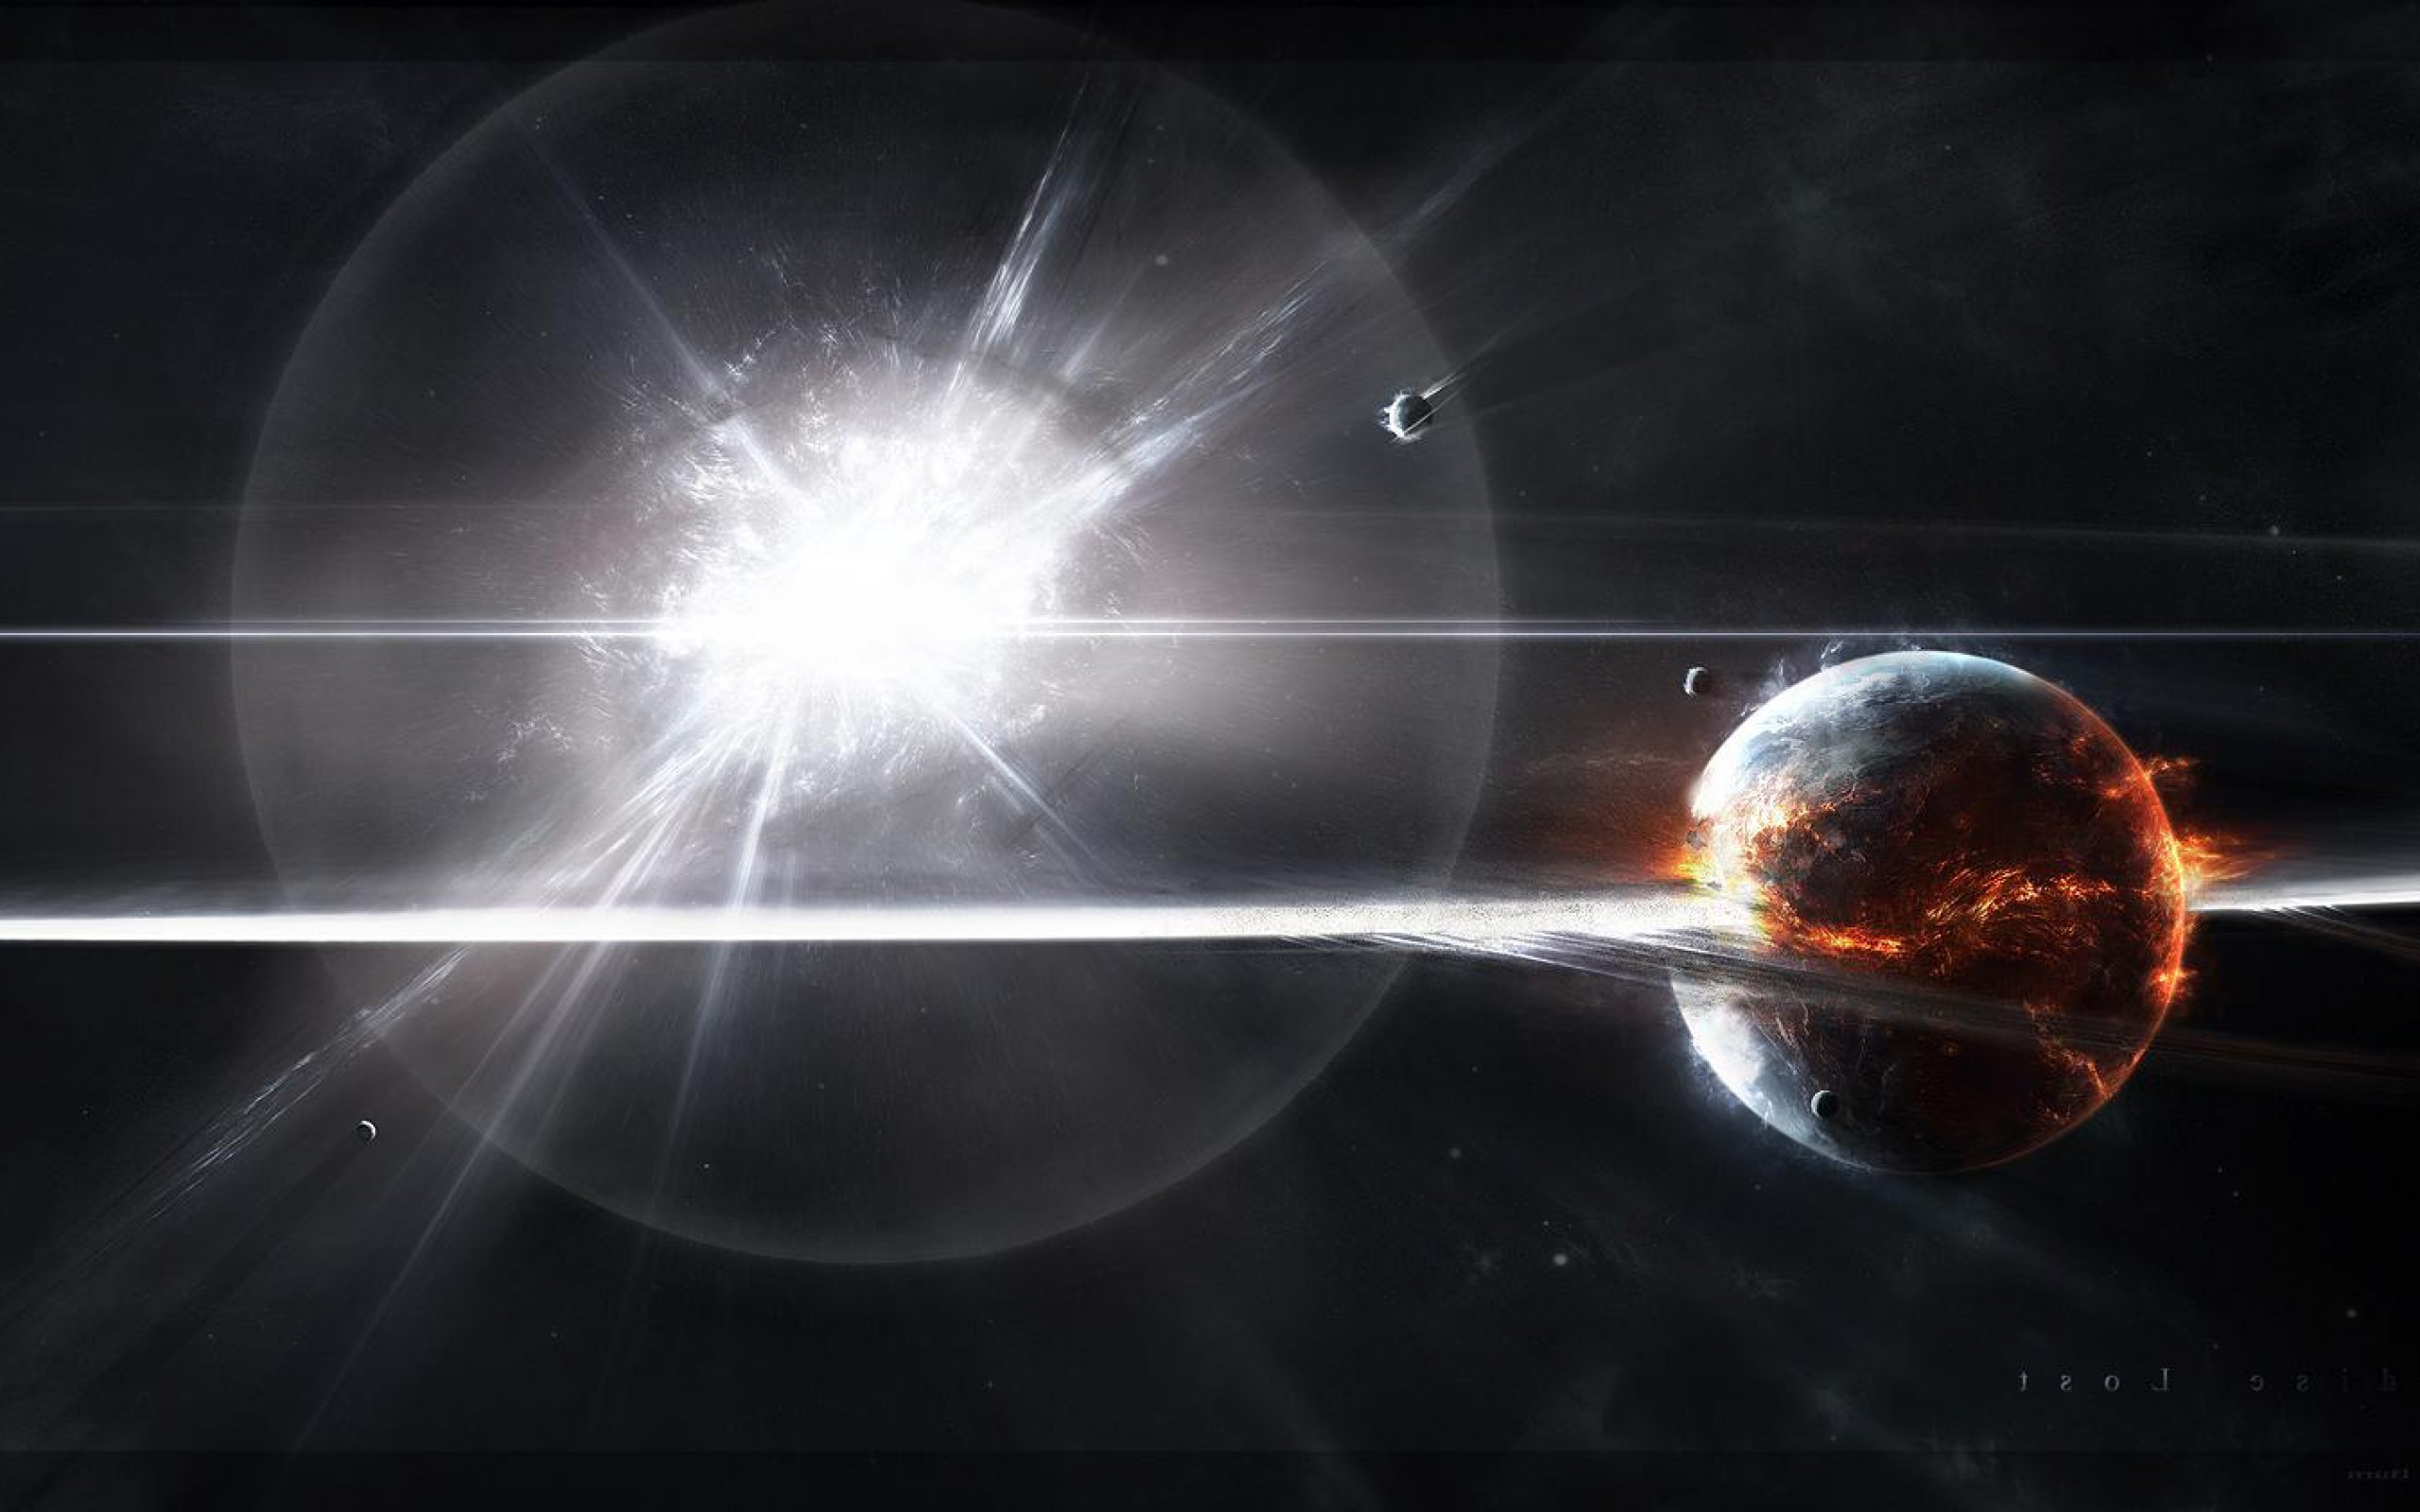 General 2560x1600 science fiction space space art apocalyptic digital art planet